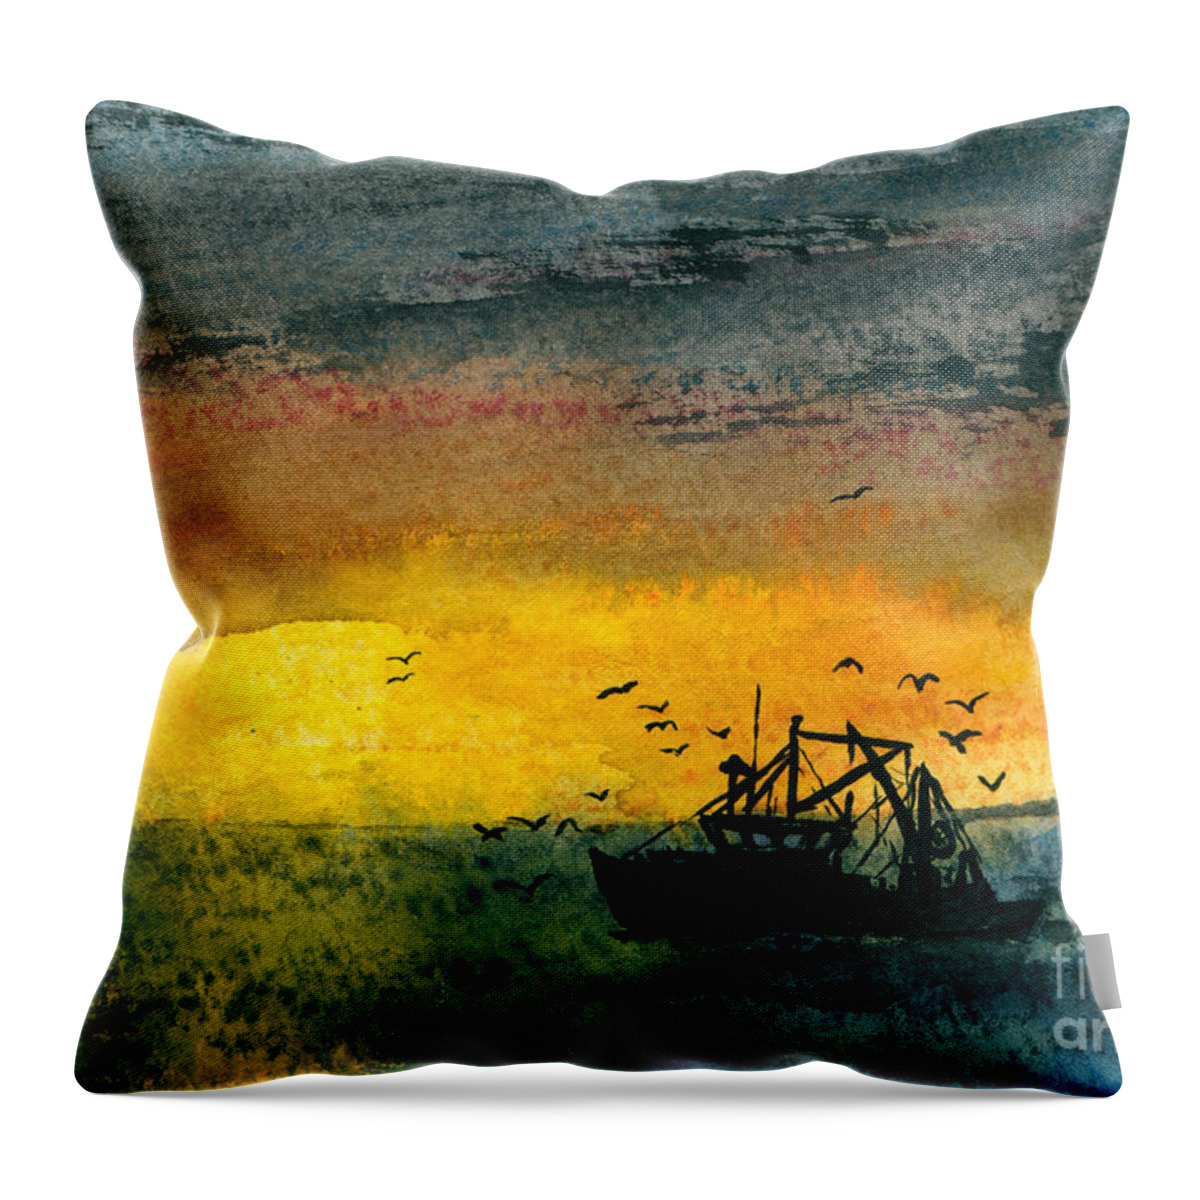 Art Throw Pillow featuring the painting Heading Out by R Kyllo